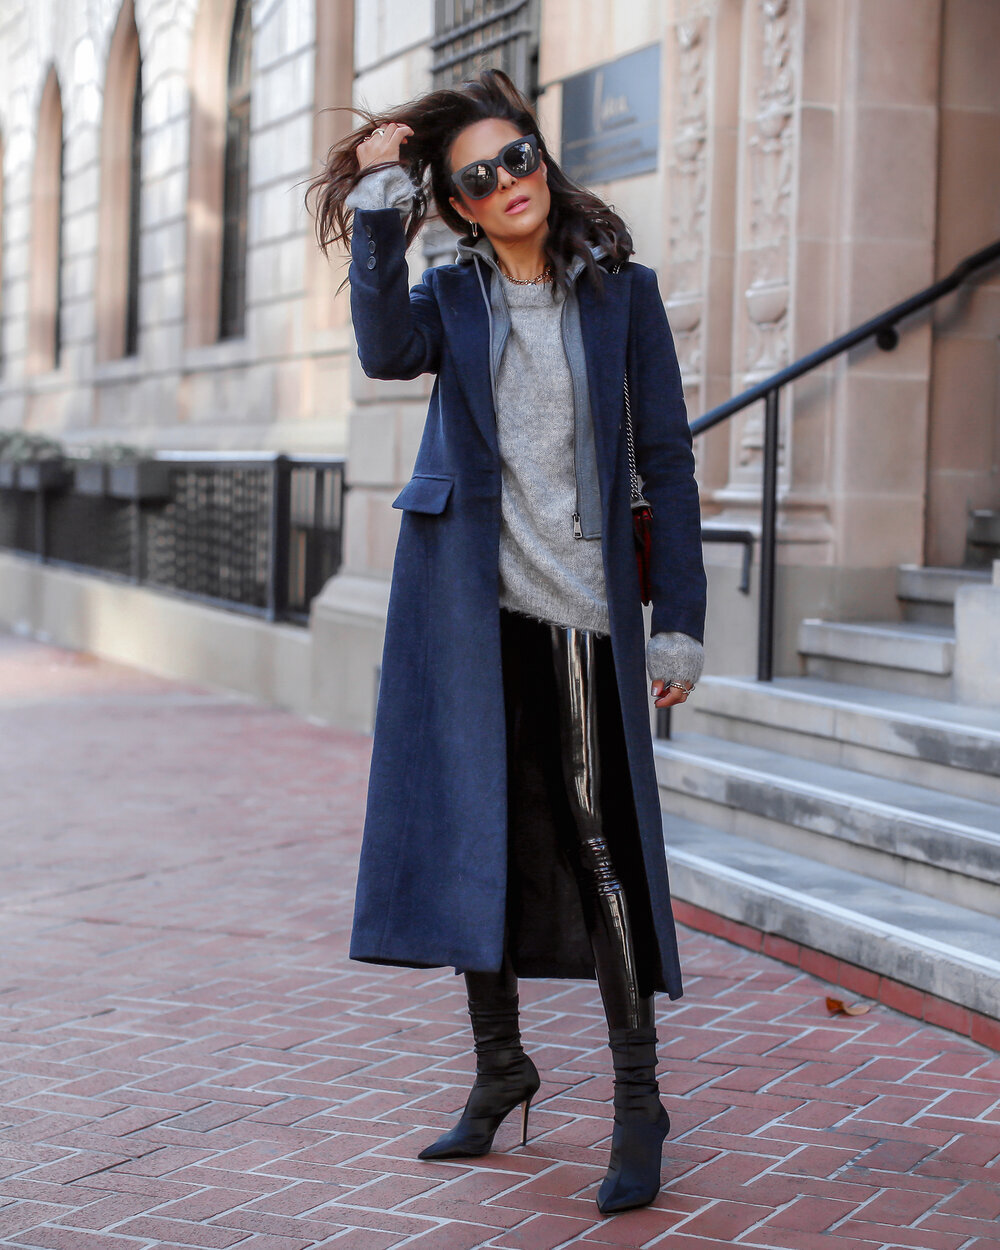 How To Effortlessly Style Patent Leggings This Winter + My Style Hack! —  Lucy's whims